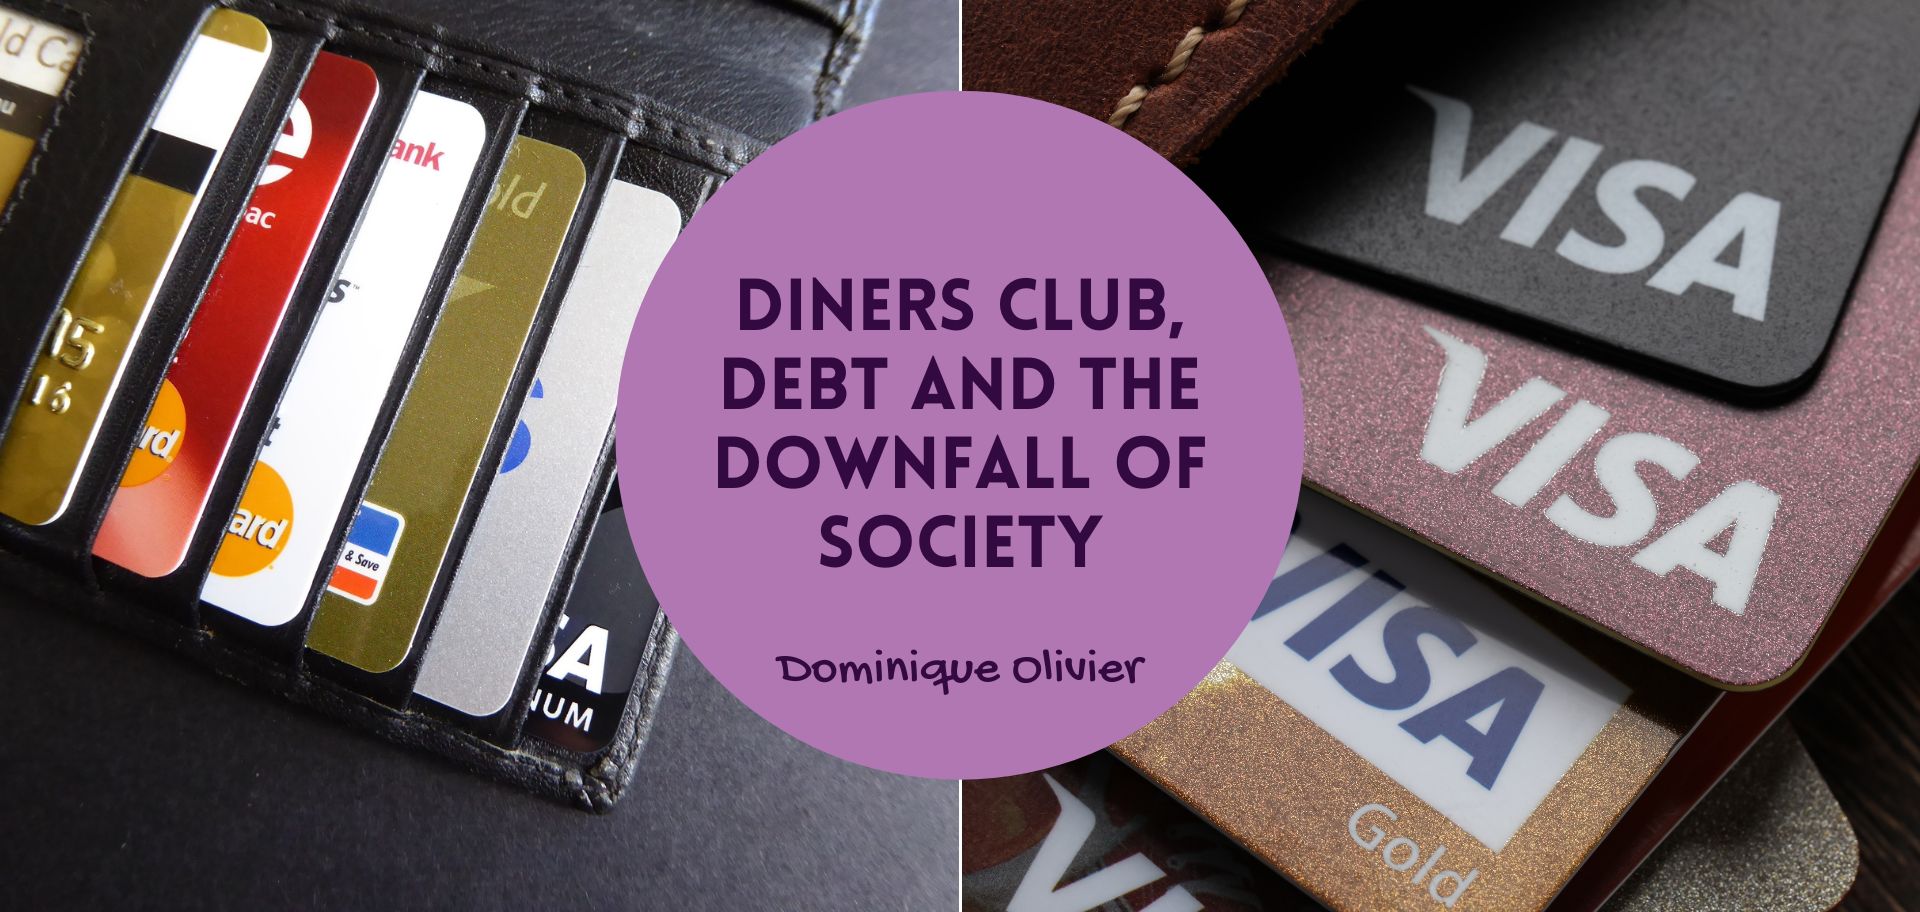 Diners Club, debt and the downfall of society